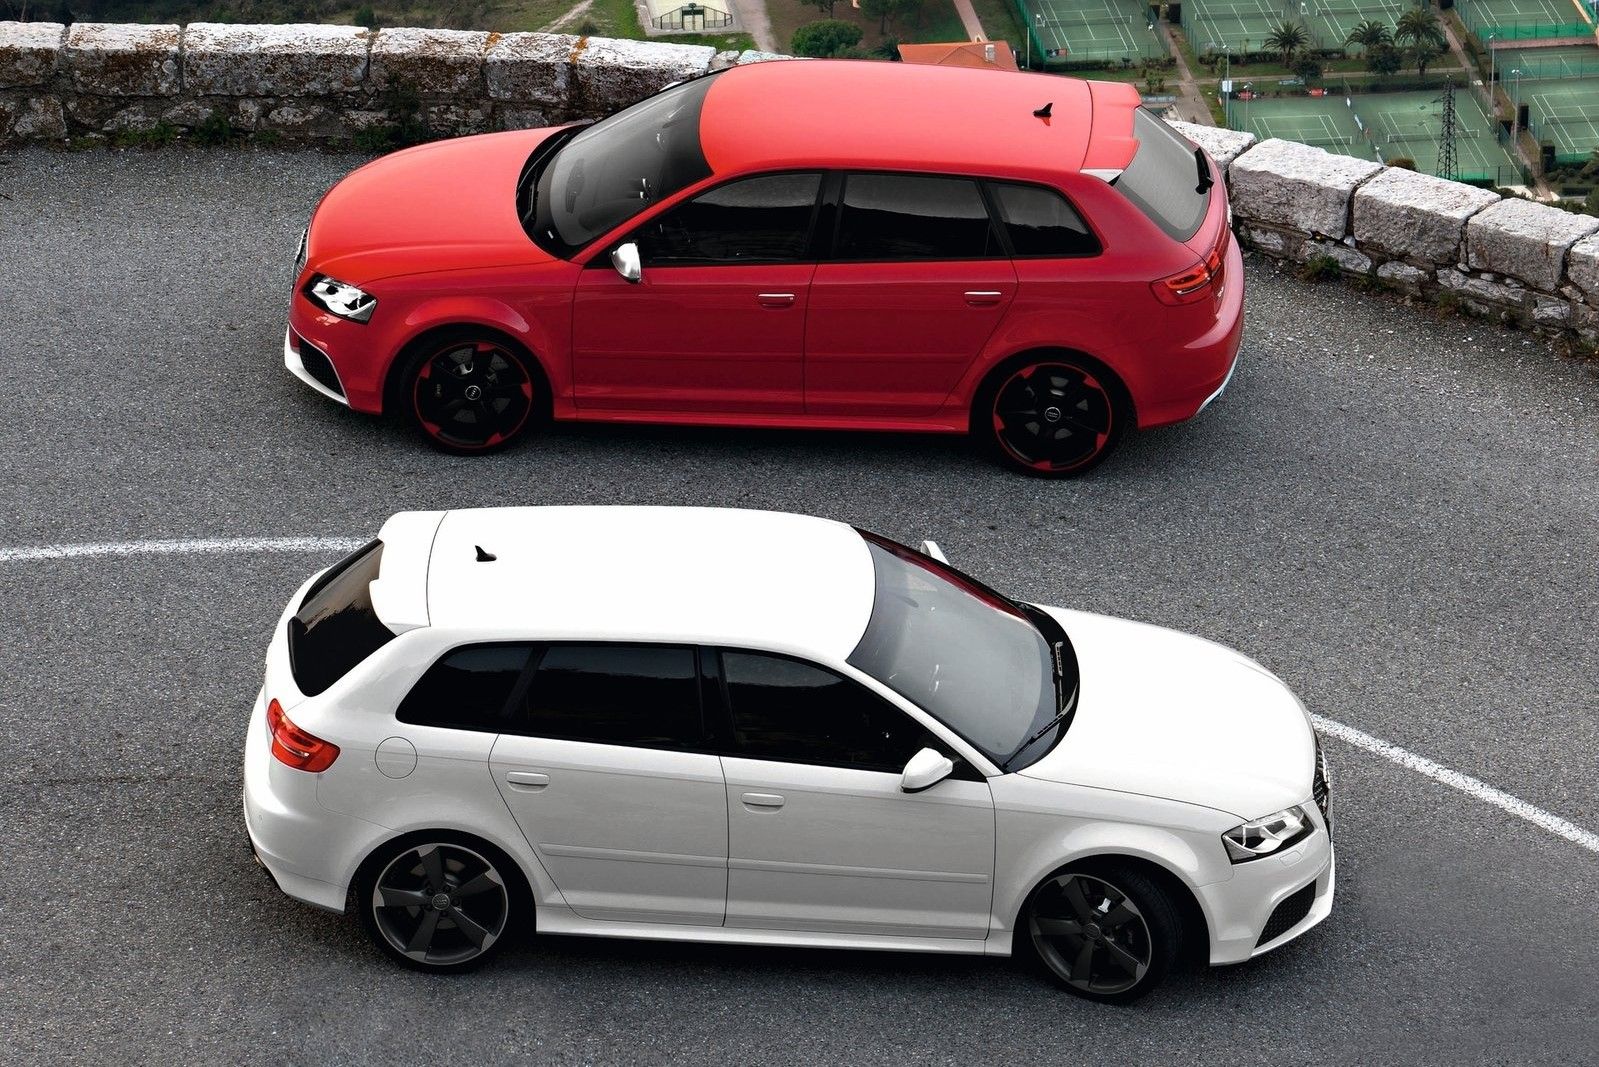 Two Audi RS3s